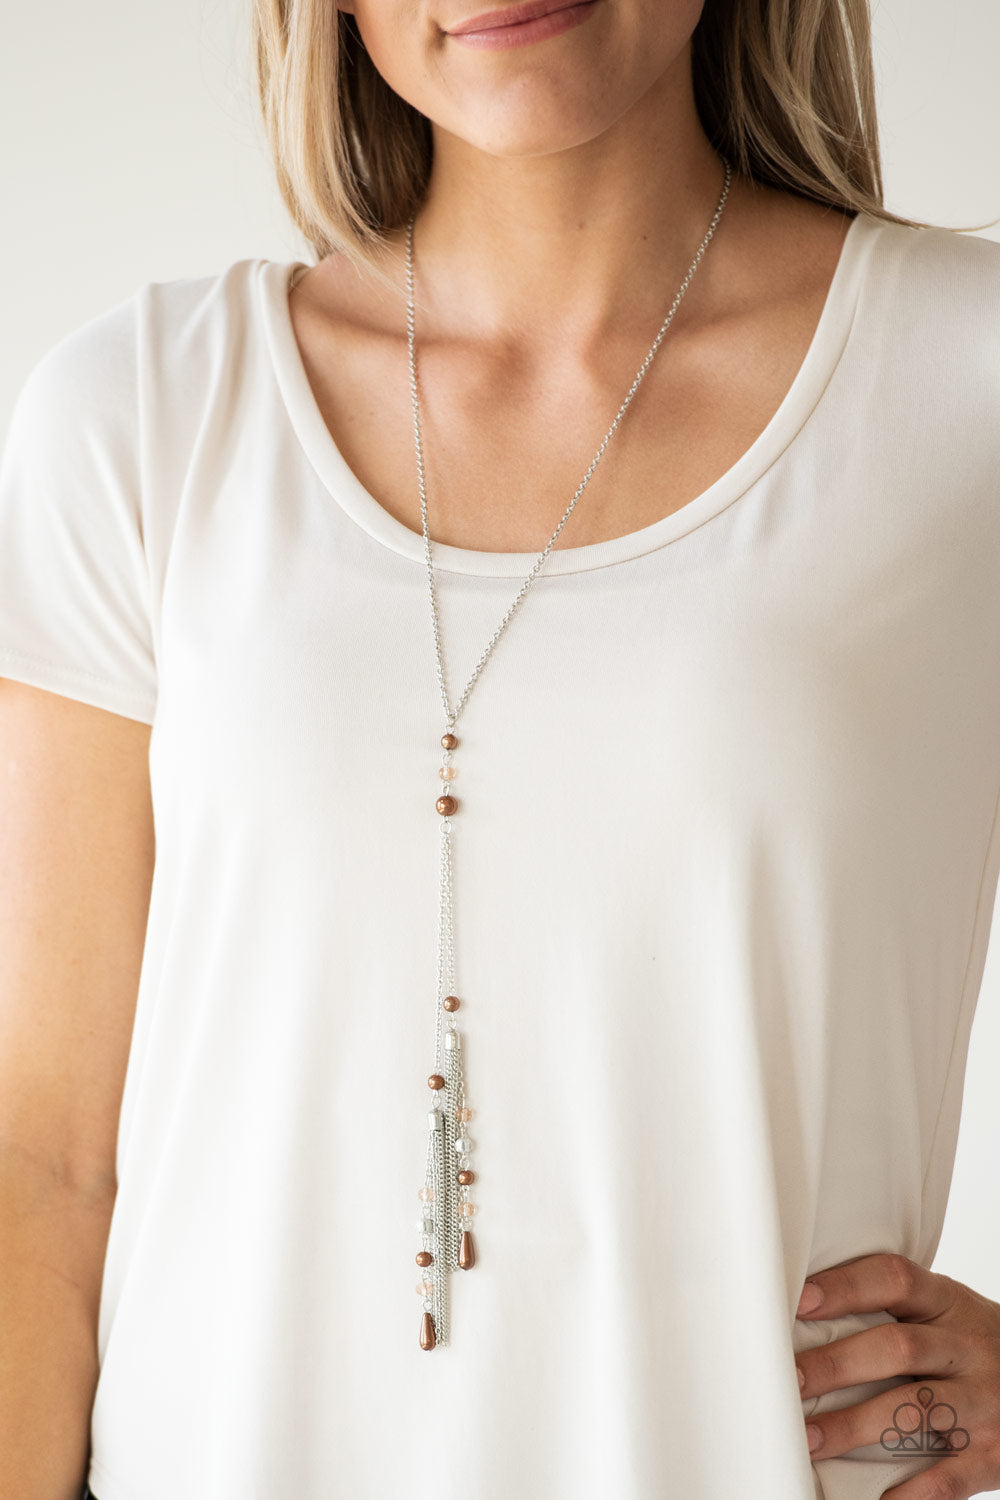 Paparazzi Necklace - Dainty brown pearls and sparkling brown crystal-like beads give way to two shimmery silver chain tassels. Infused with ornate silver beads, strands of matching beads trickle down the tassels for a refined fla